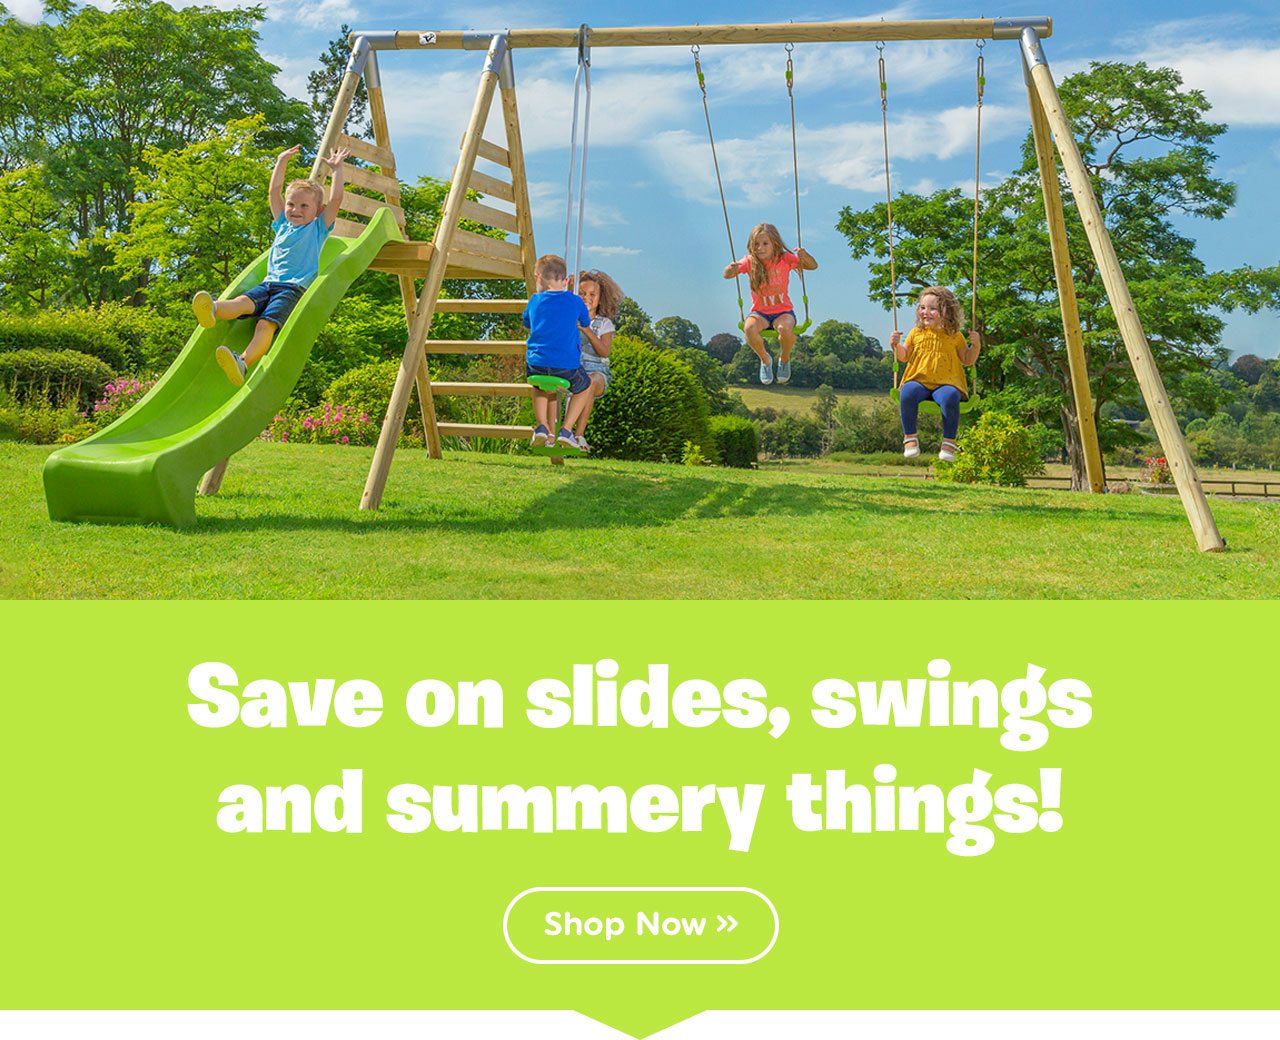 smyths swings and slides